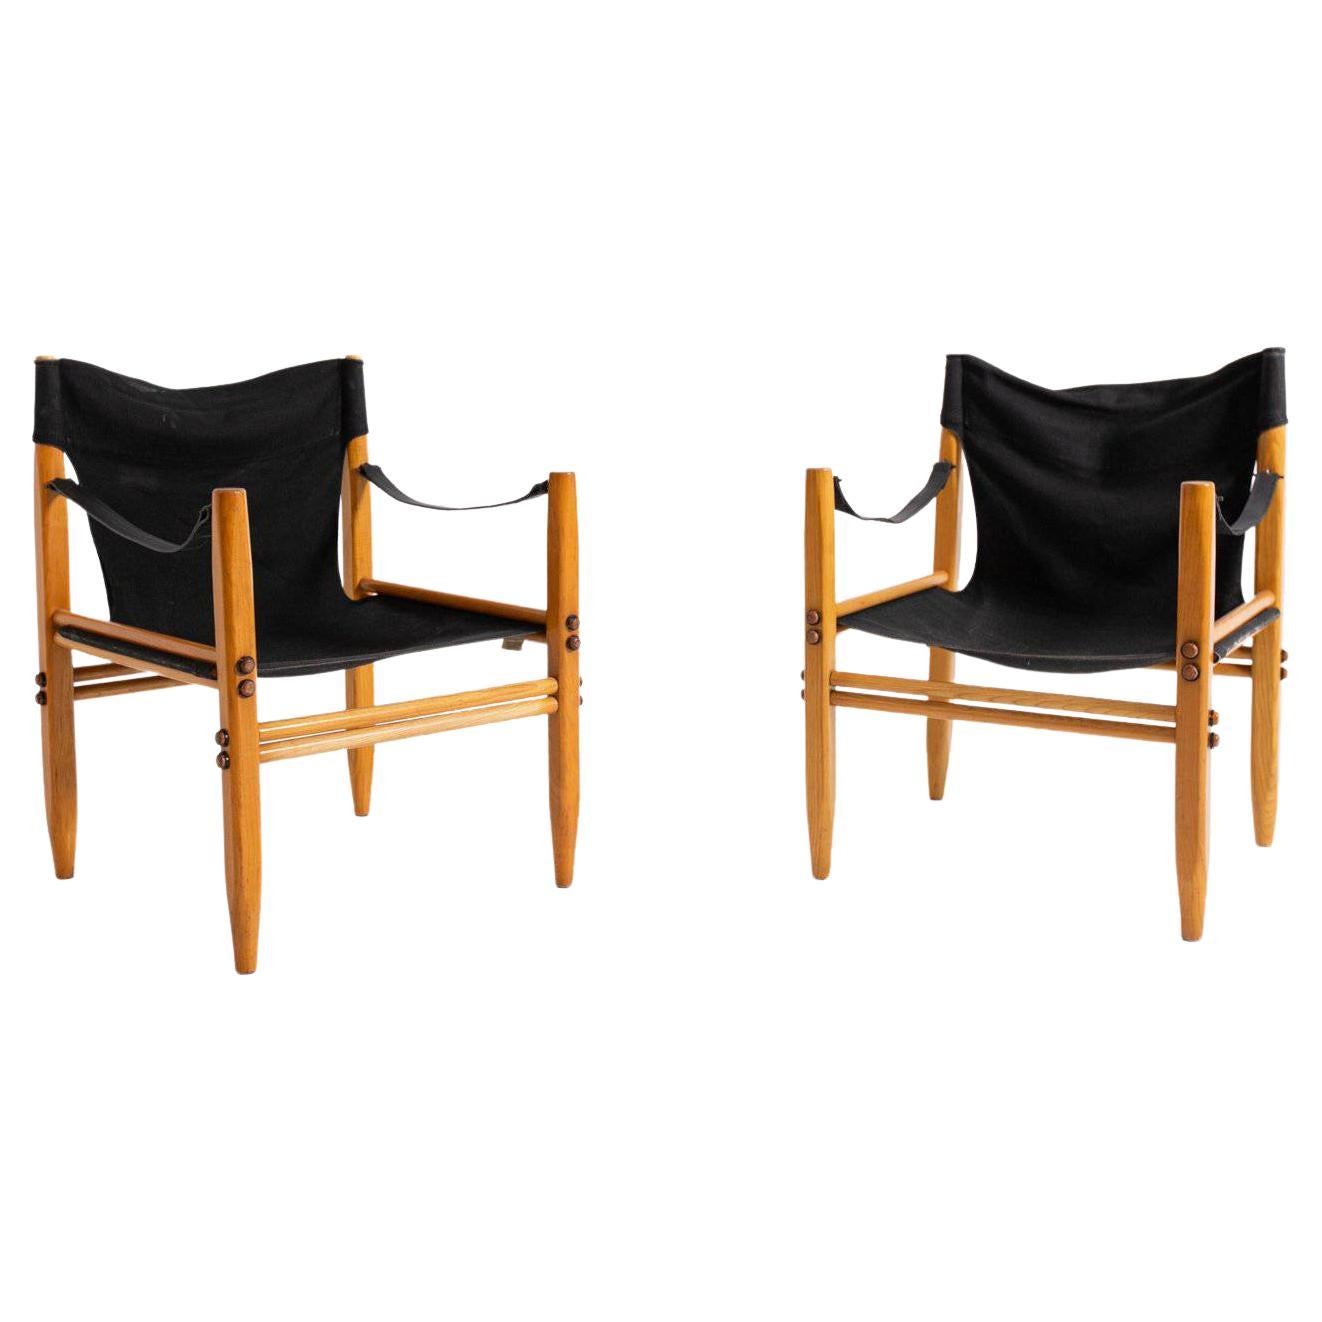 Pair of Armchairs Mod Oasi 85 by Franco Legler for Zanotta